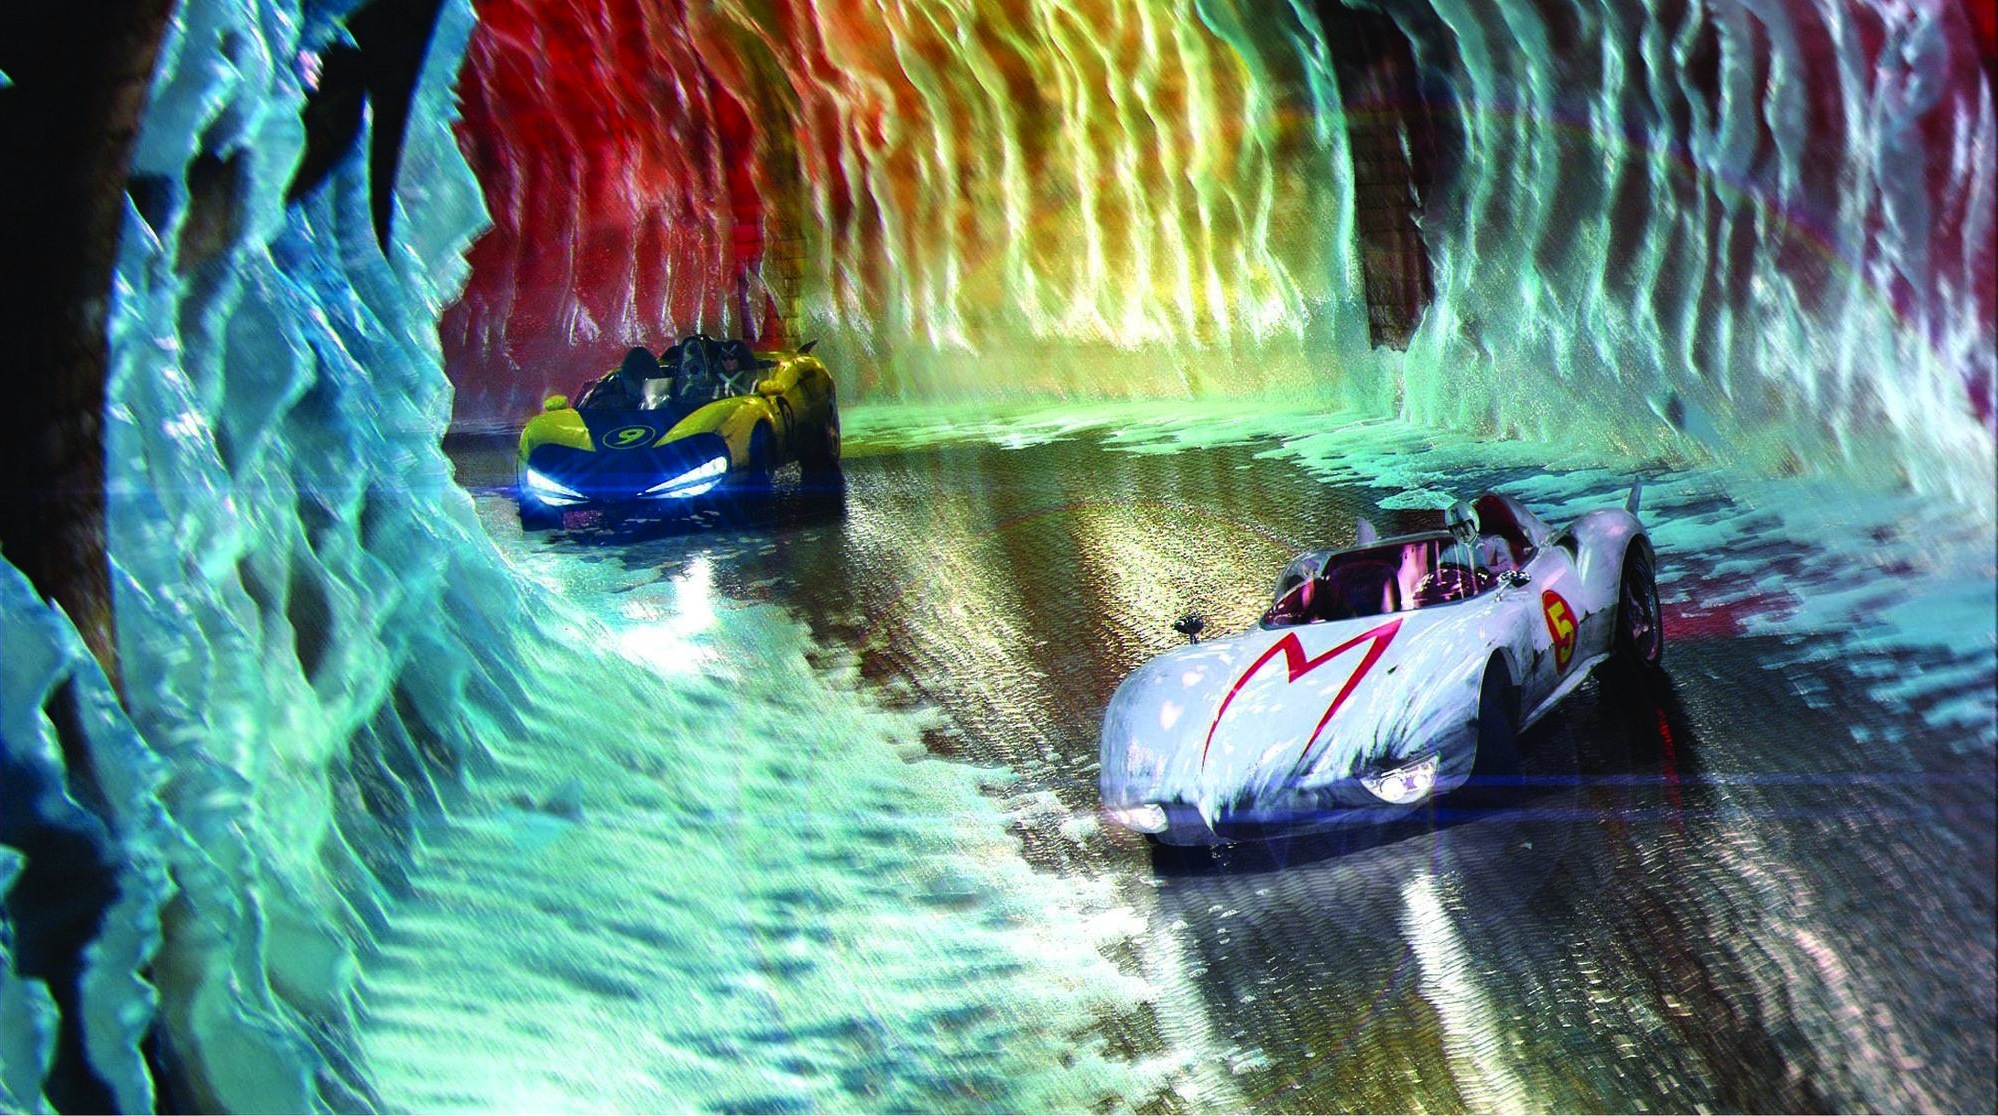 A futuristic white car with a red M on the hood zooms through a tunnel with neon blue and red waterfalls lining the walls, while a darker car with blue headlights chases it.